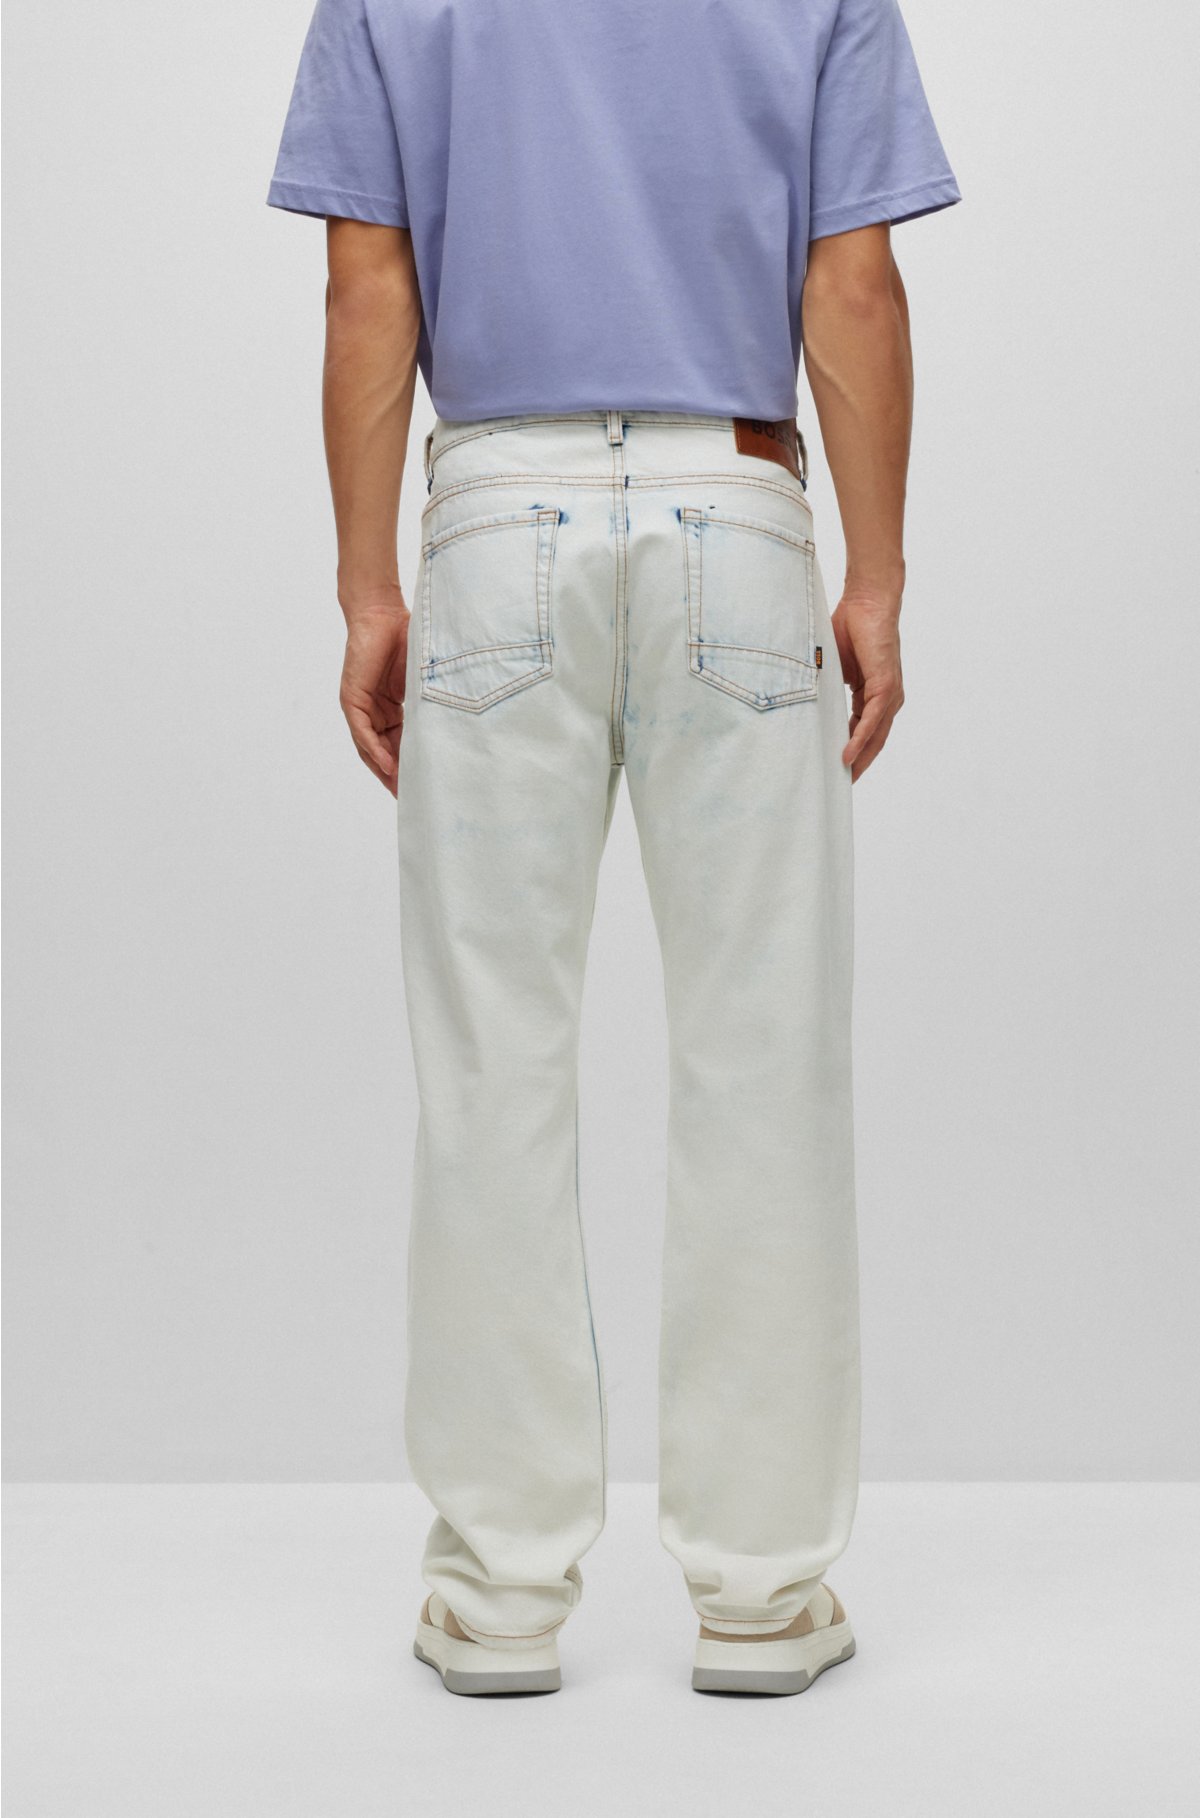 - Relaxed-fit jeans in pale blue denim